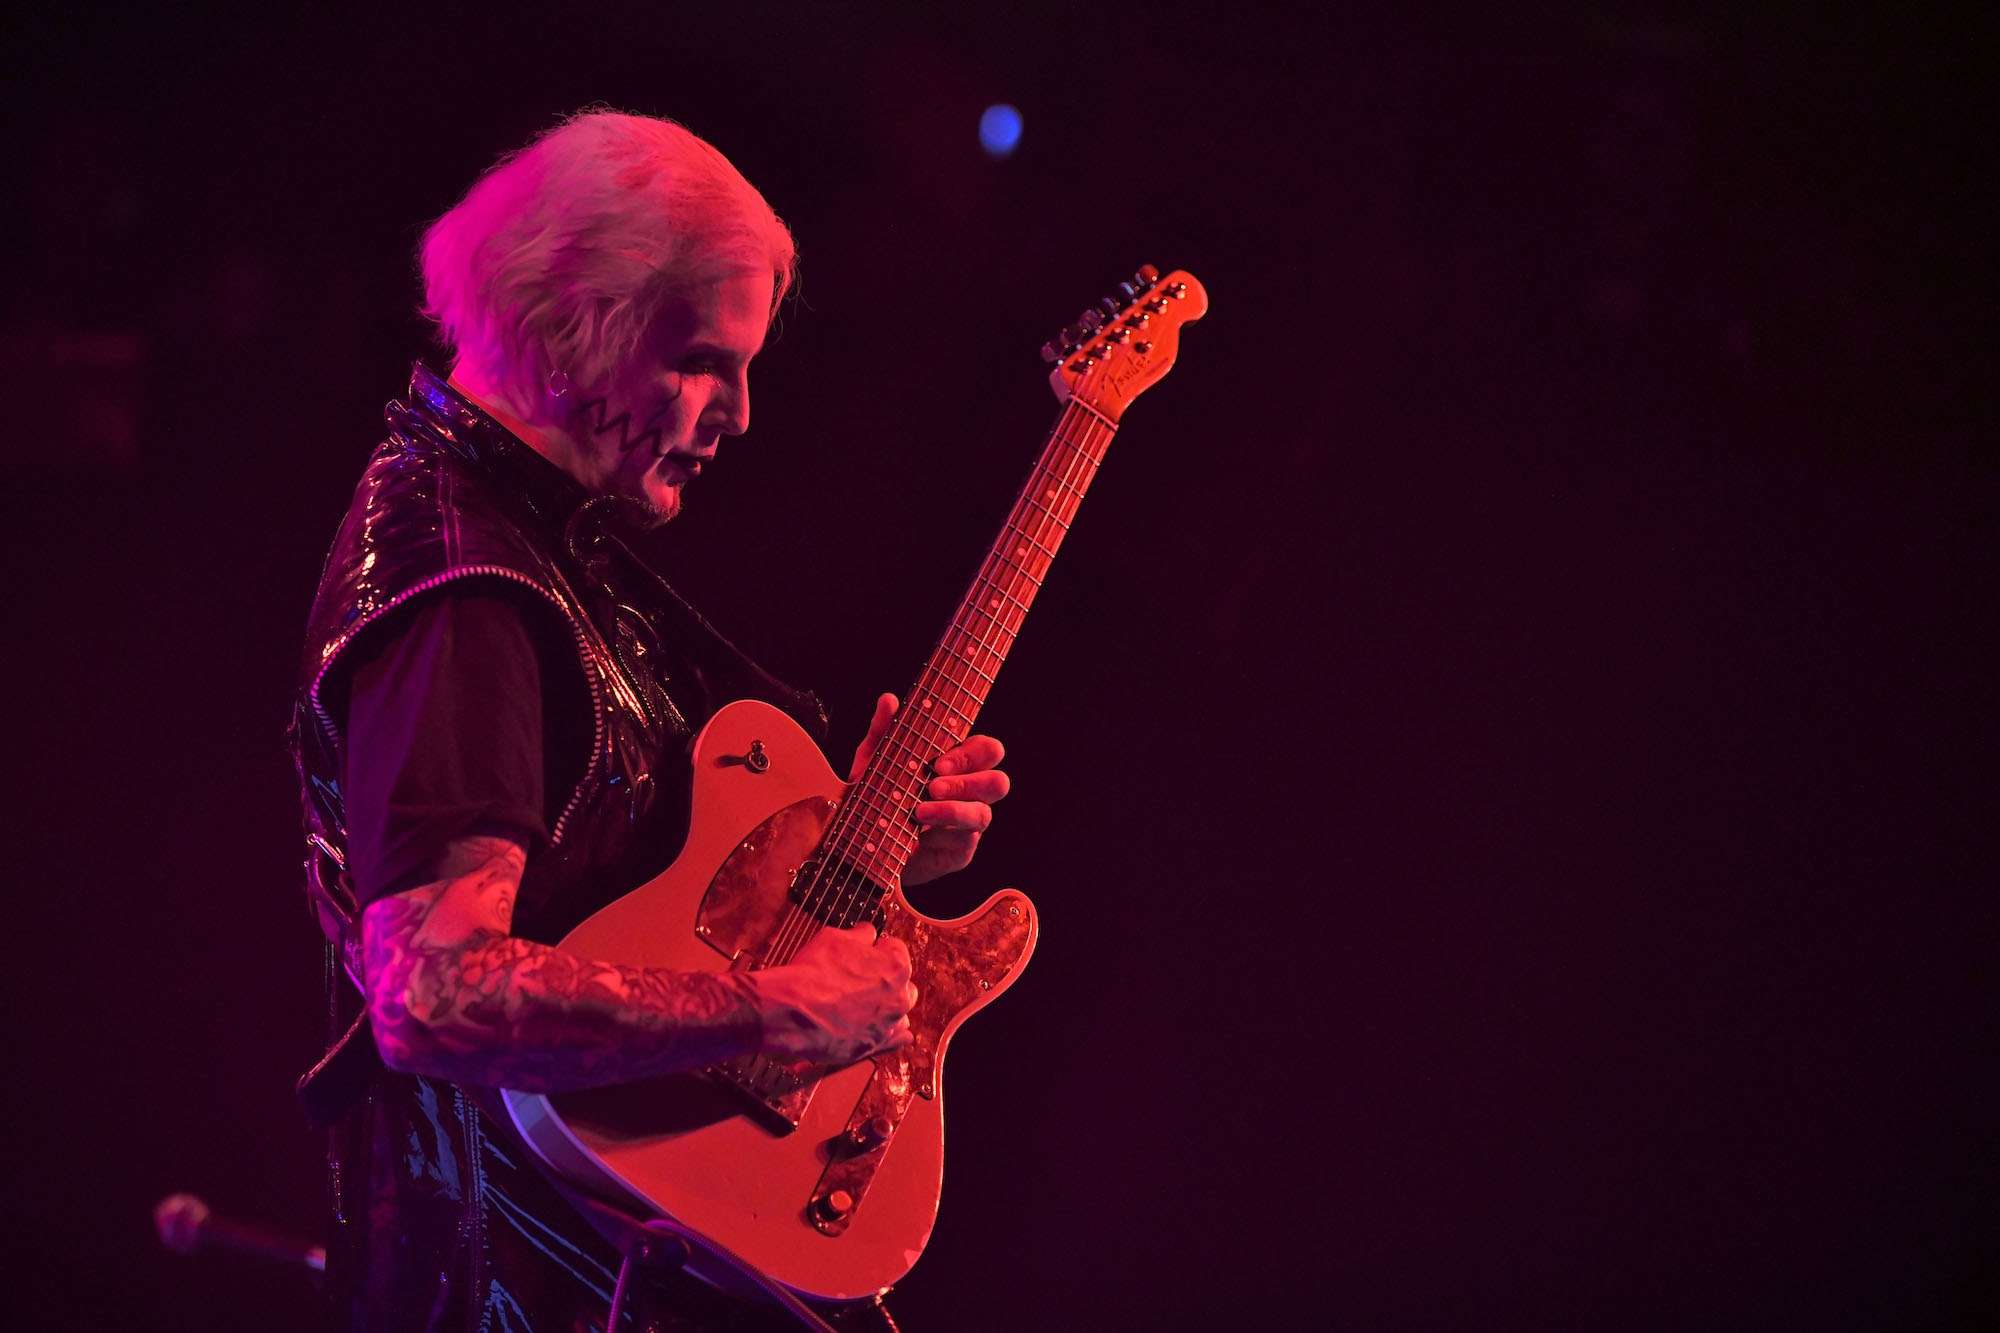 John 5 Live at The Forge [GALLERY] 15